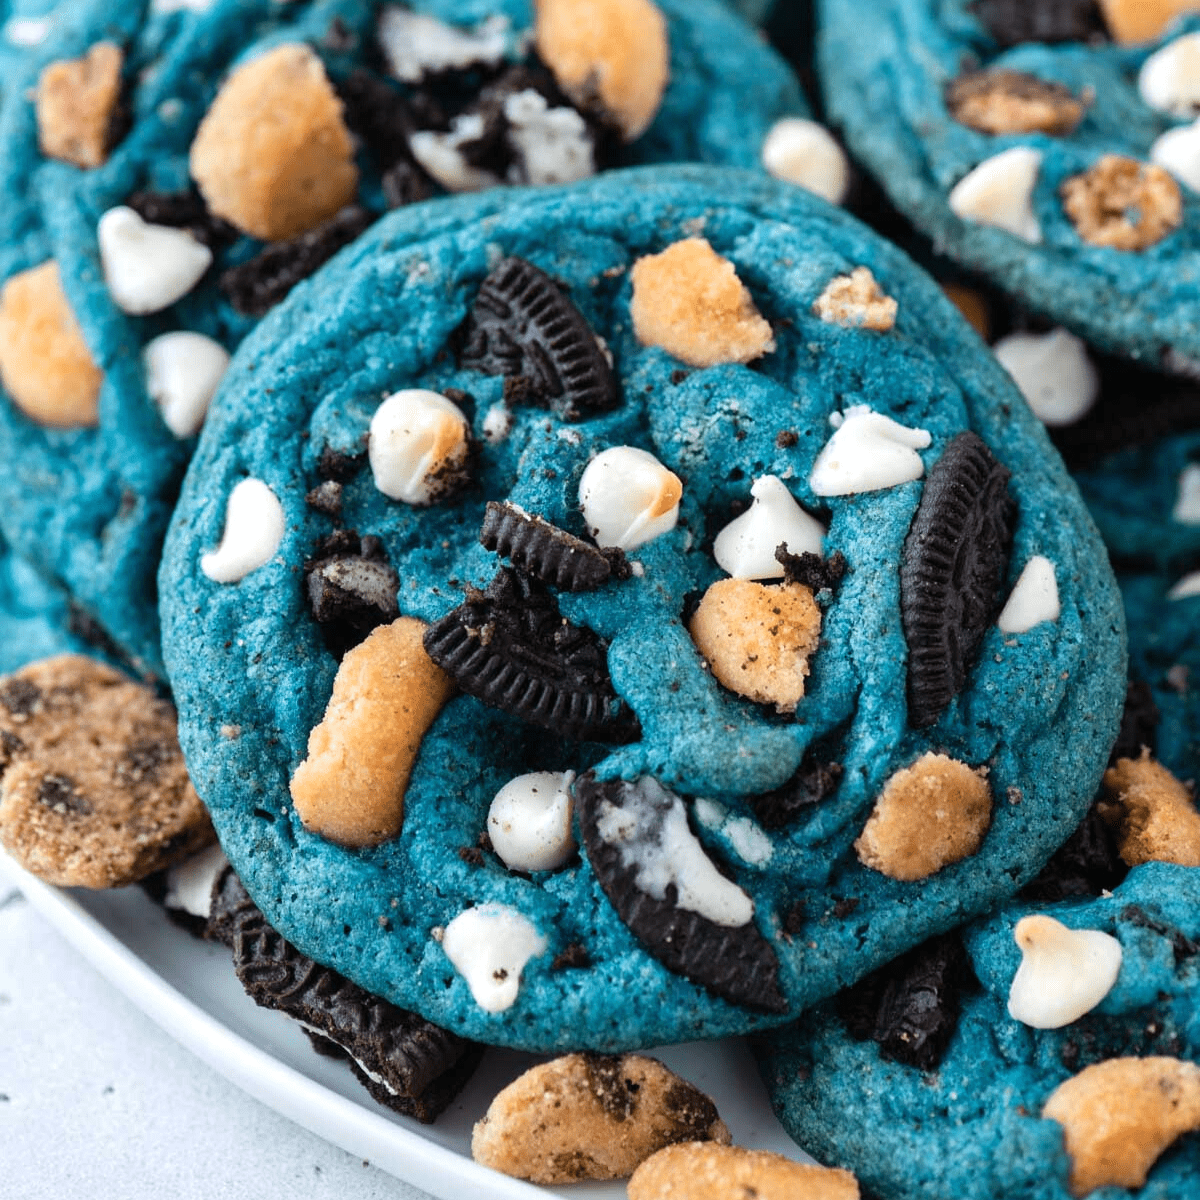 https://thefirstyearblog.com/wp-content/uploads/2023/04/Cookie-Monster-Cookies-Square.png